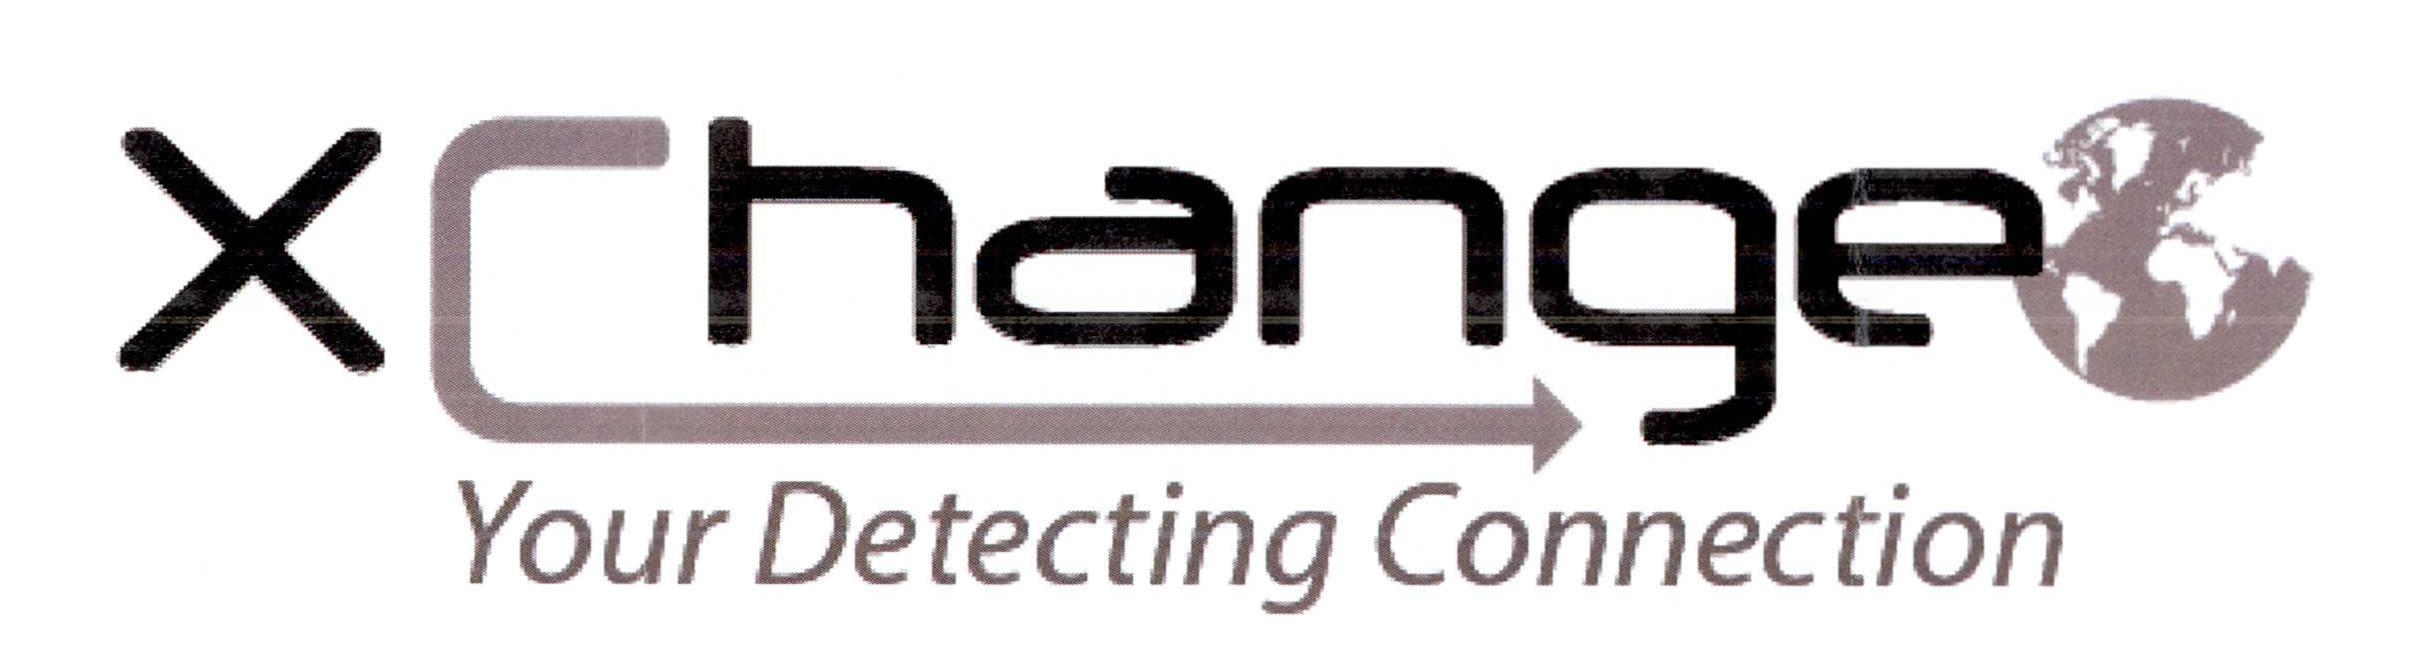  XCHANGE YOUR DETECTING CONNECTION